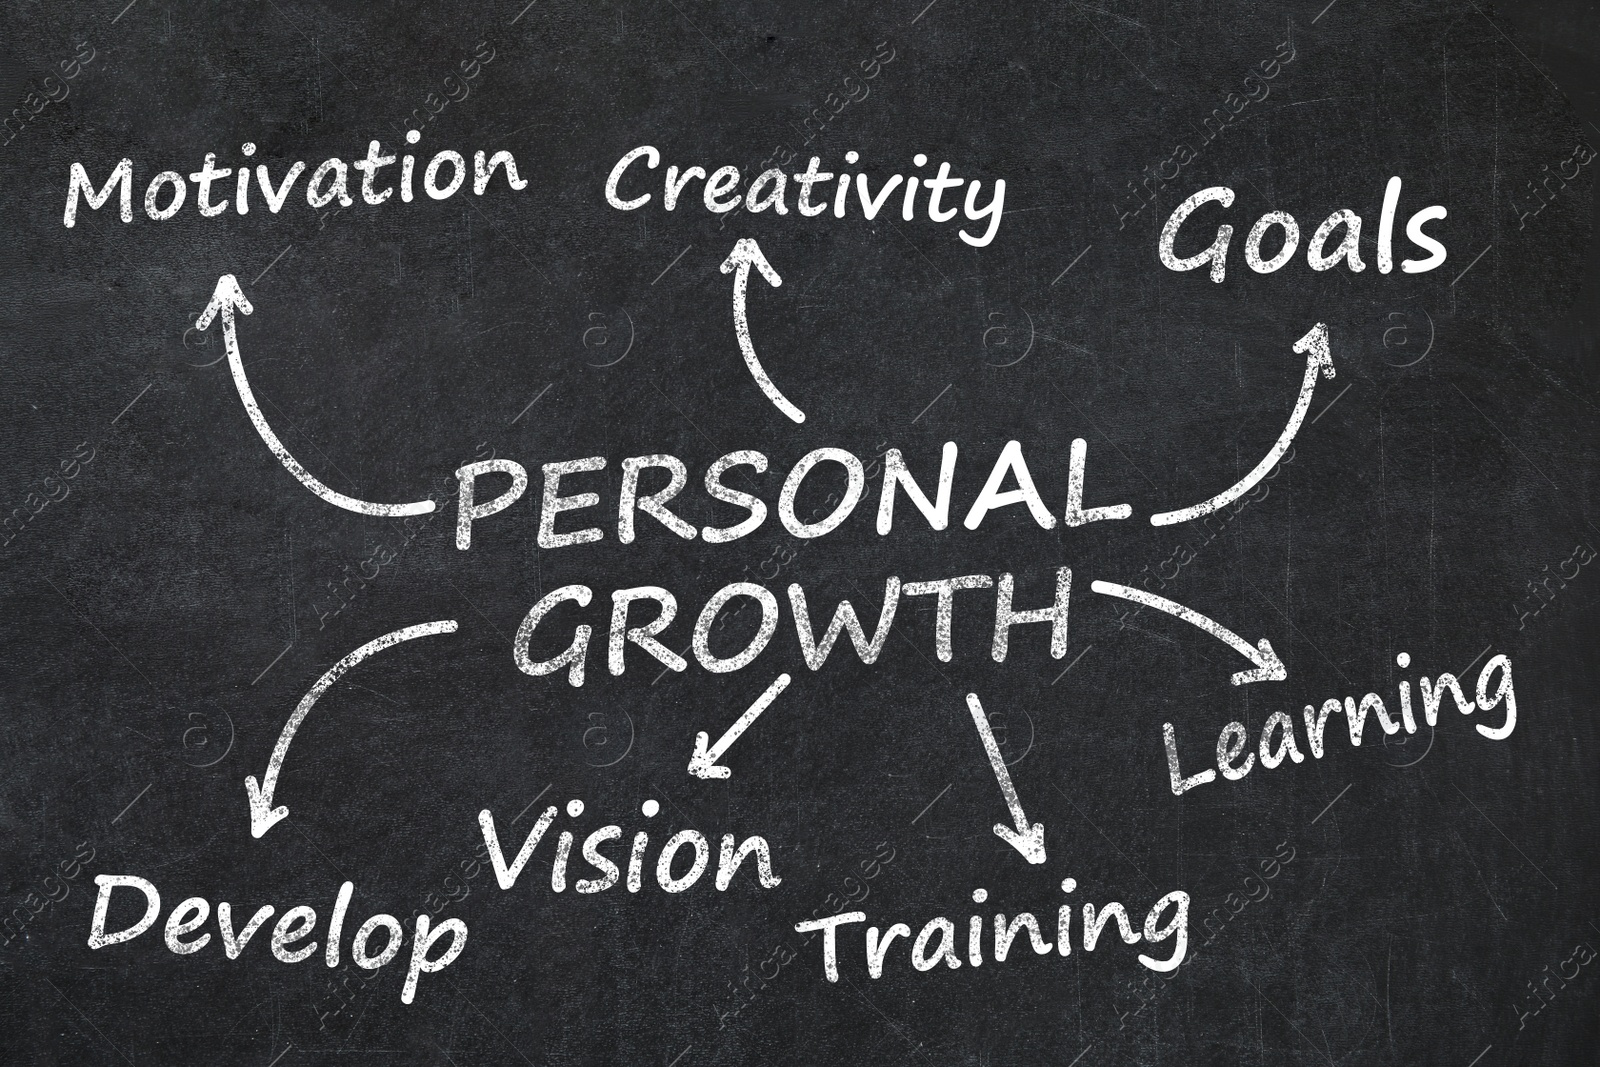 Illustration of Personal growth concept. Word cloud drawn on blackboard